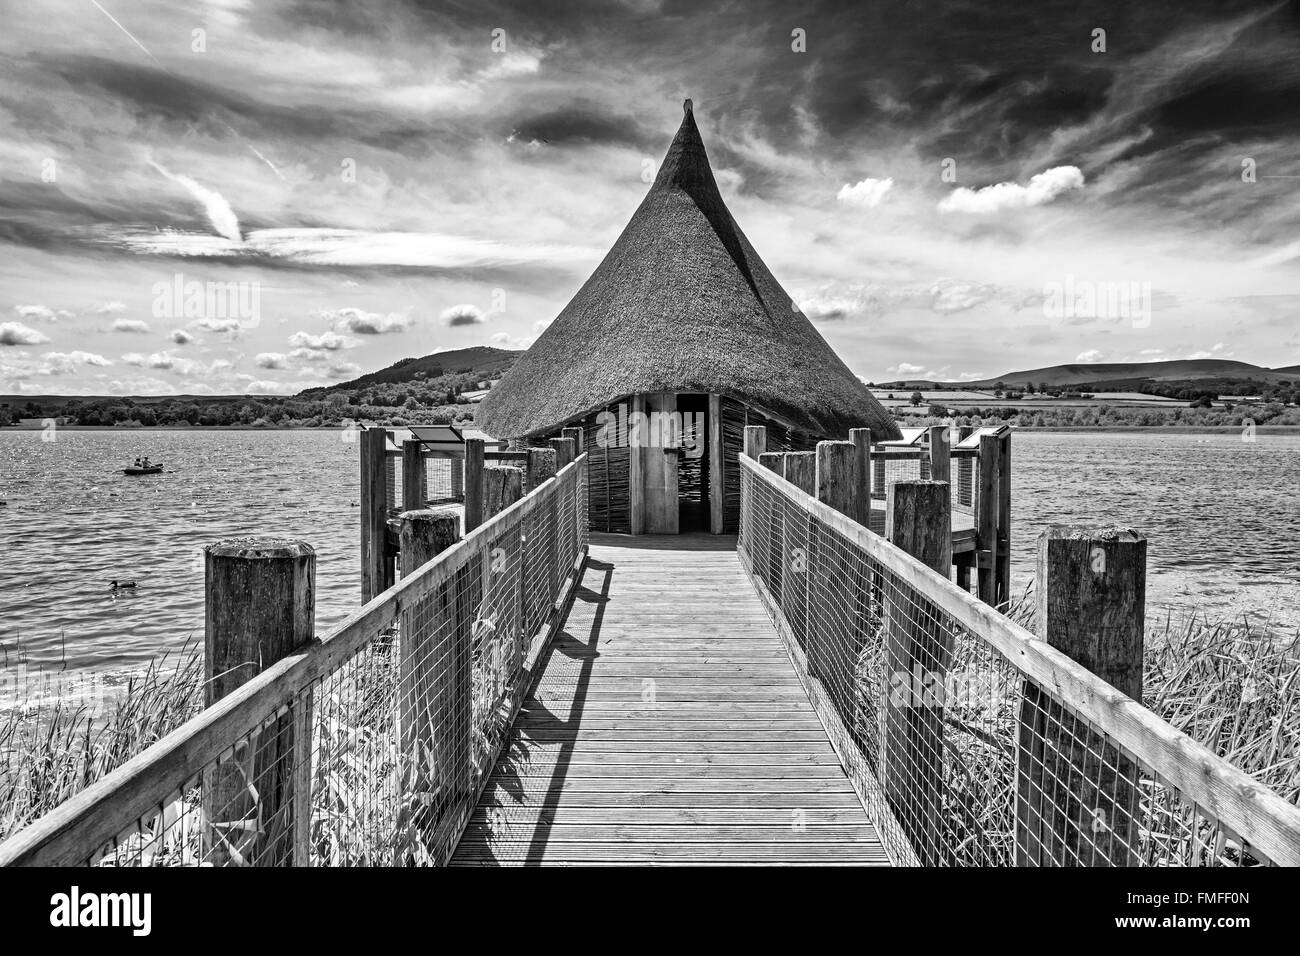 Jetty and thatched hut landscape / waterscape at Llangorse lake, brecon, powys,wales, UK Stock Photo